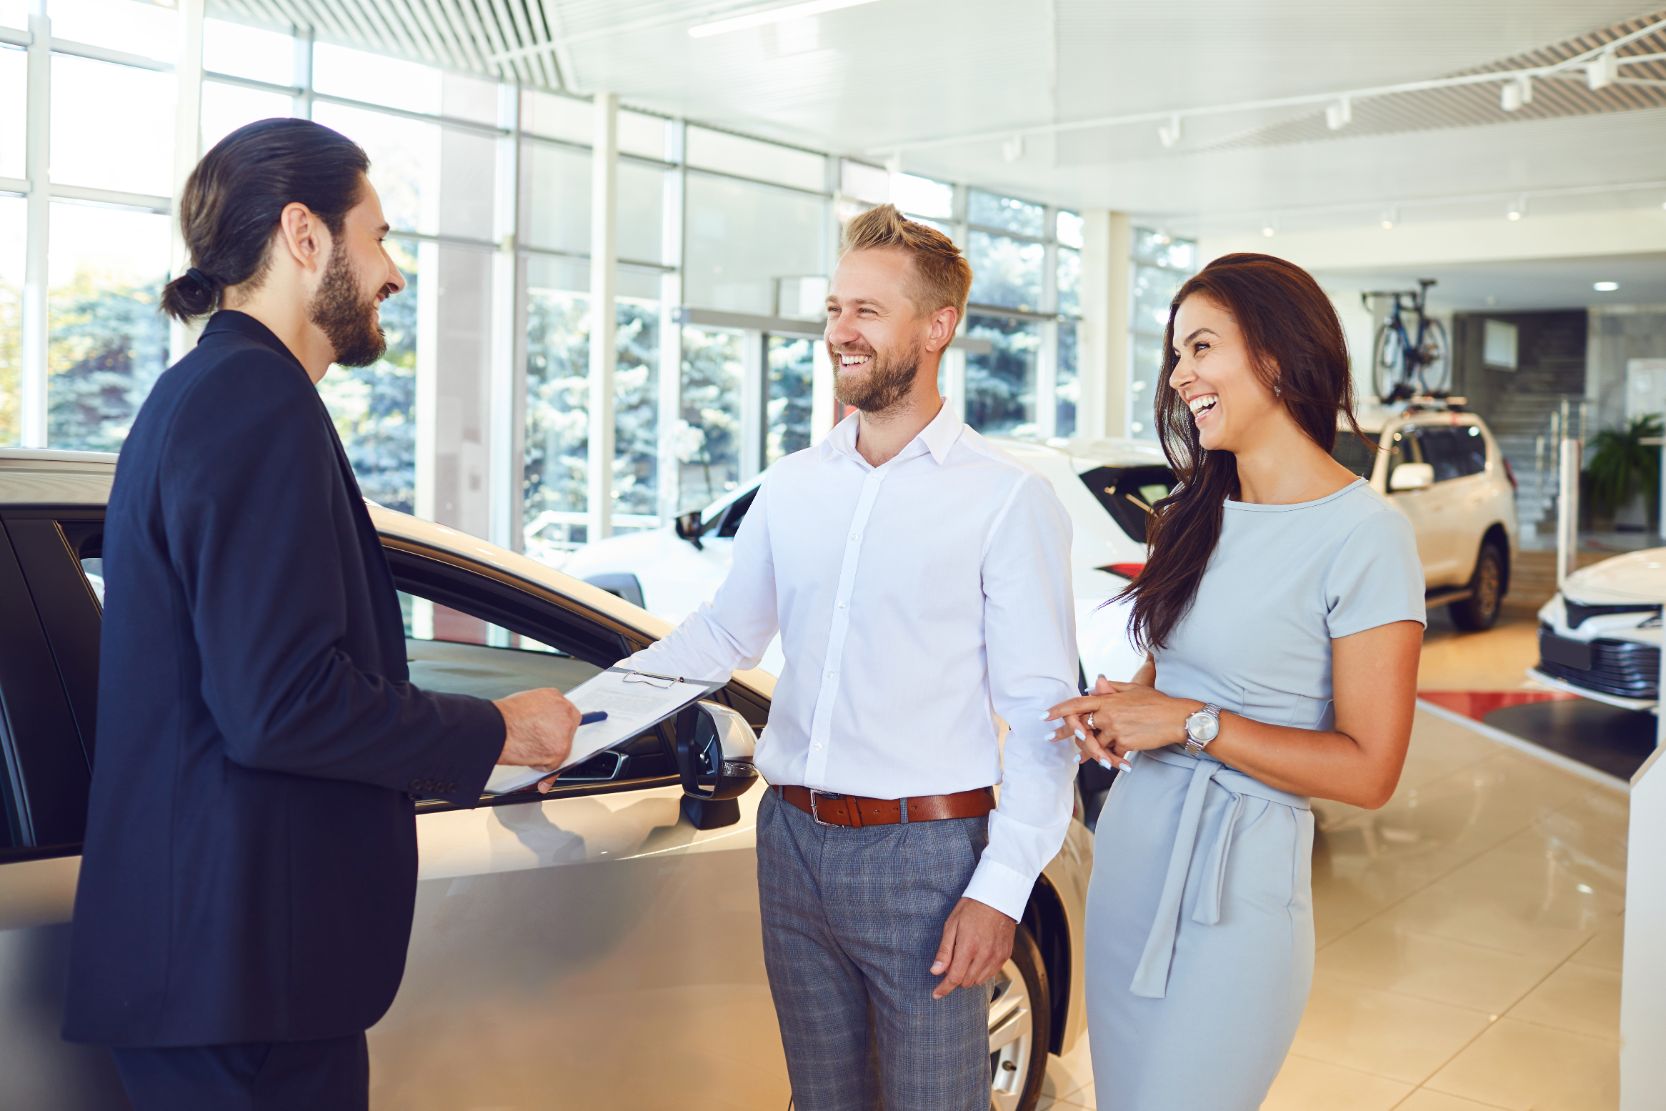 Reliable car salesman agreeing on a deal for new car